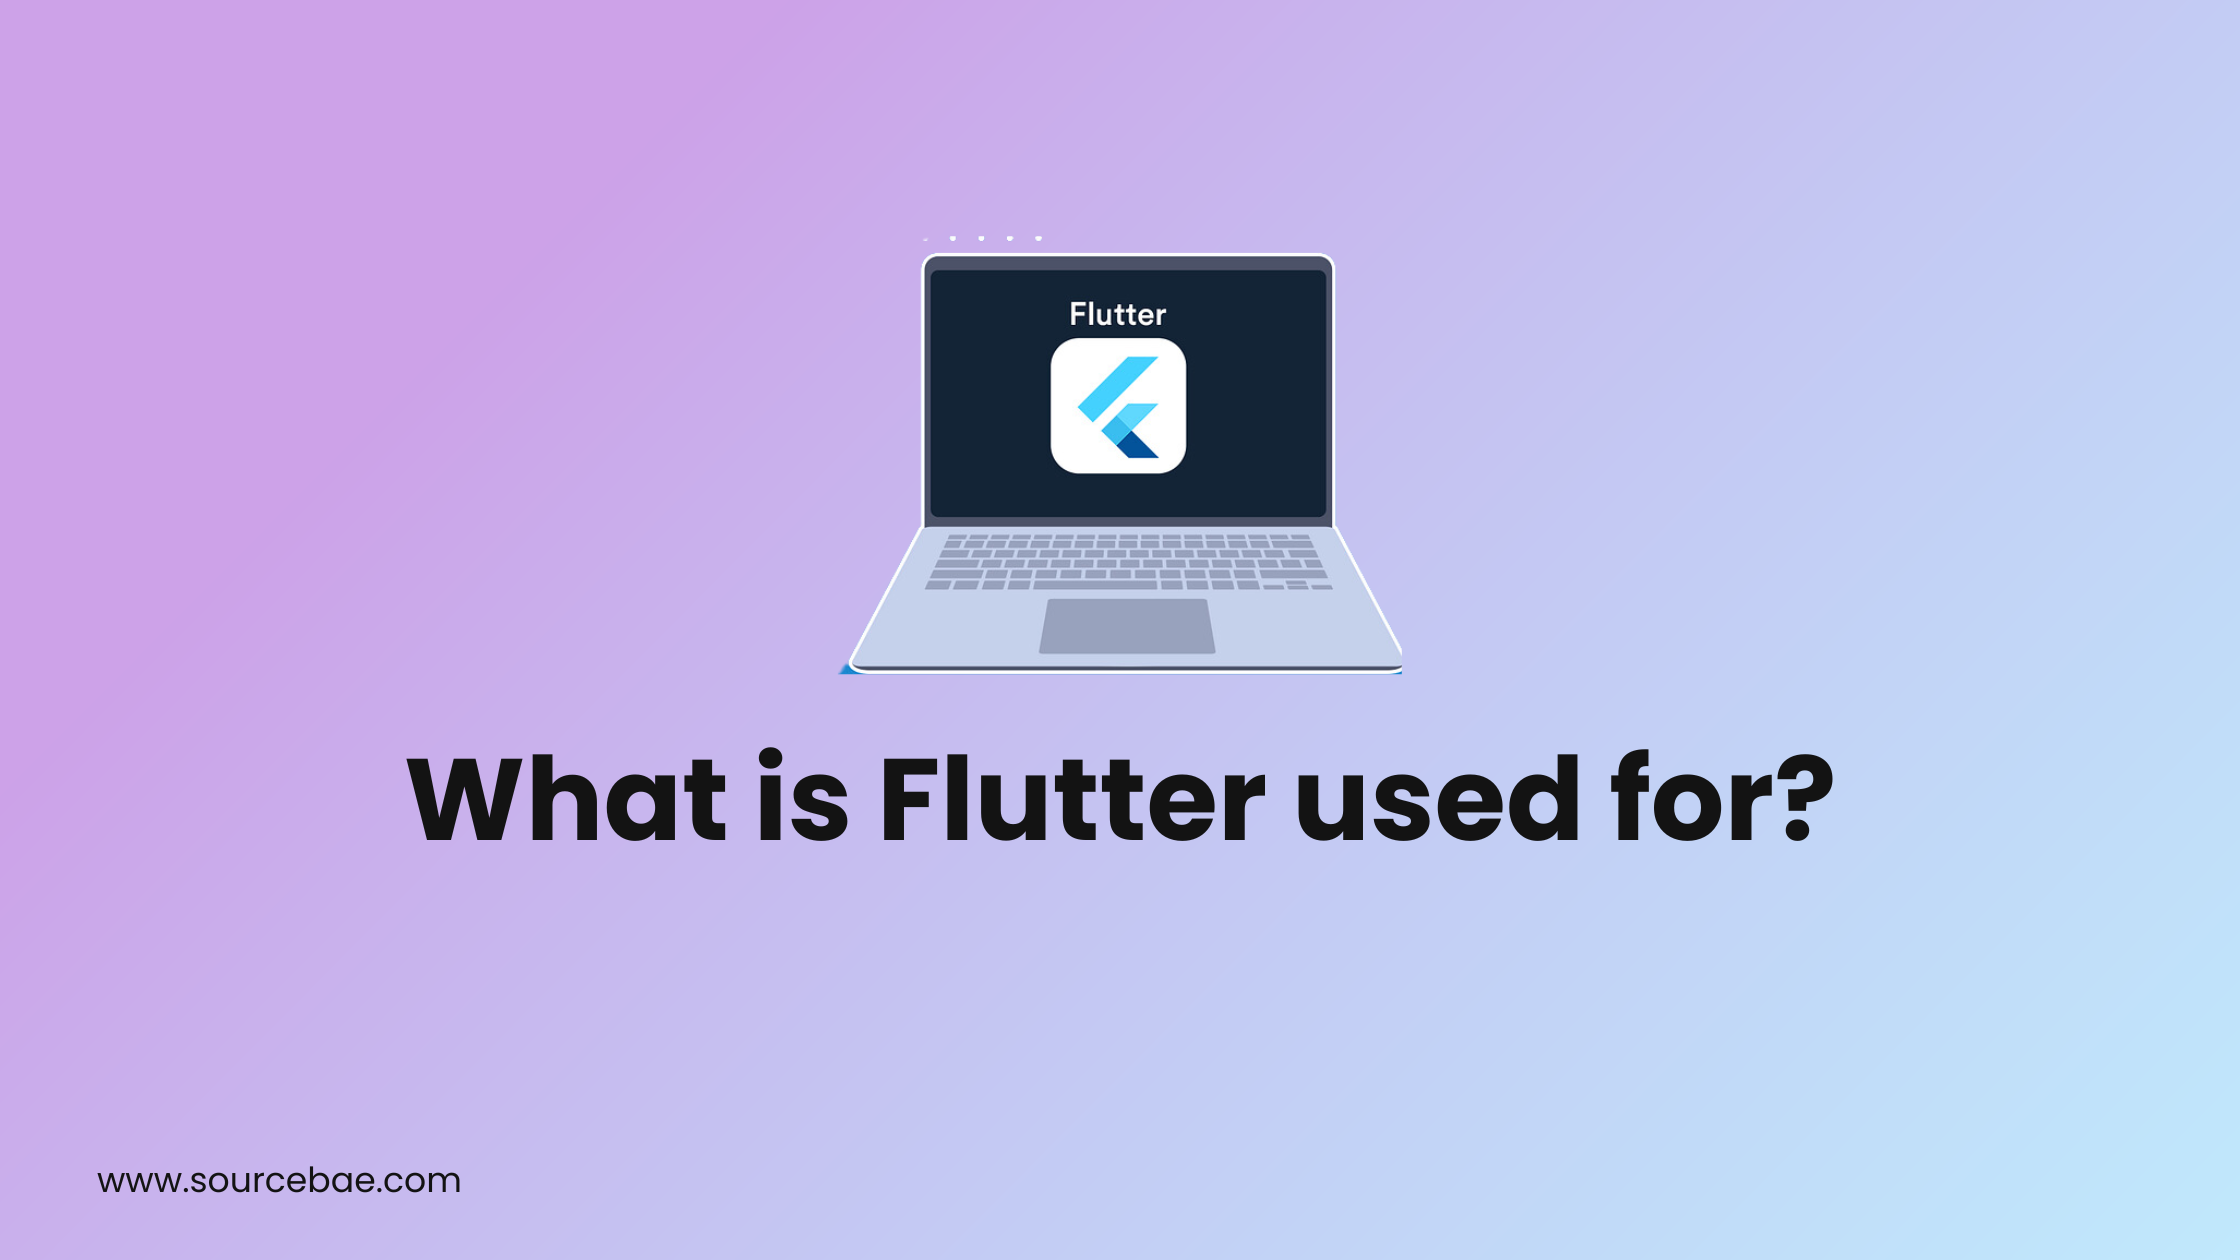 What is Flutter used for?